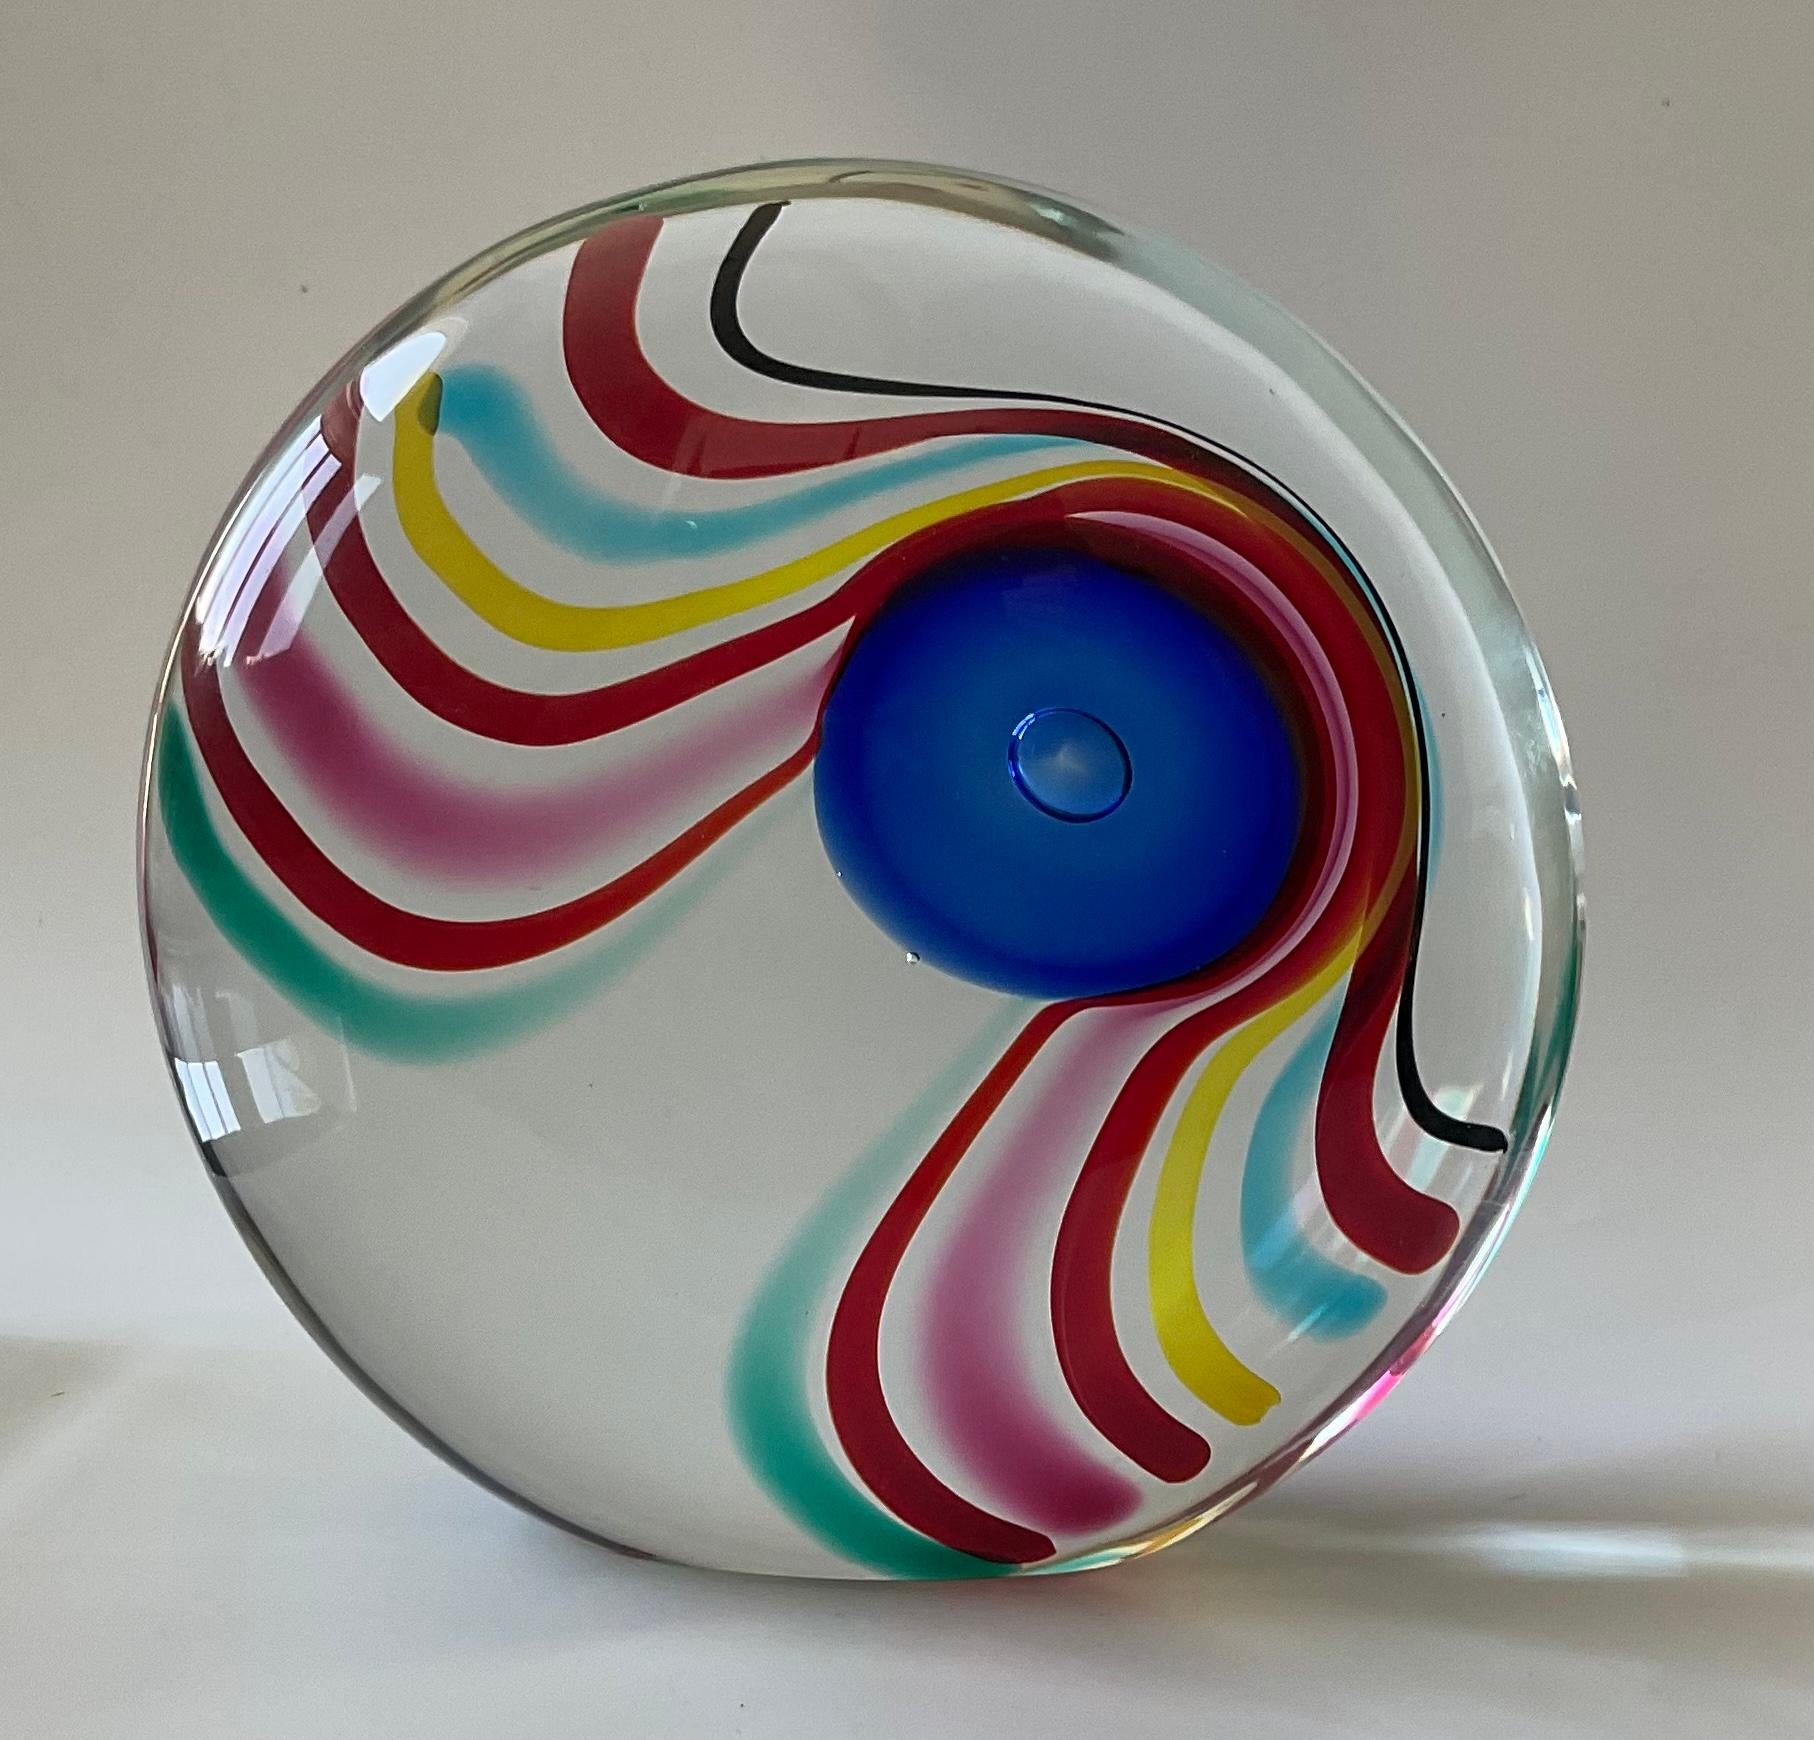 Large Seguso Arte Vetro signed striped Murano Glass abstract sculpture. Very vibrant multi color sculpture that is signed on the bottom as pictured.